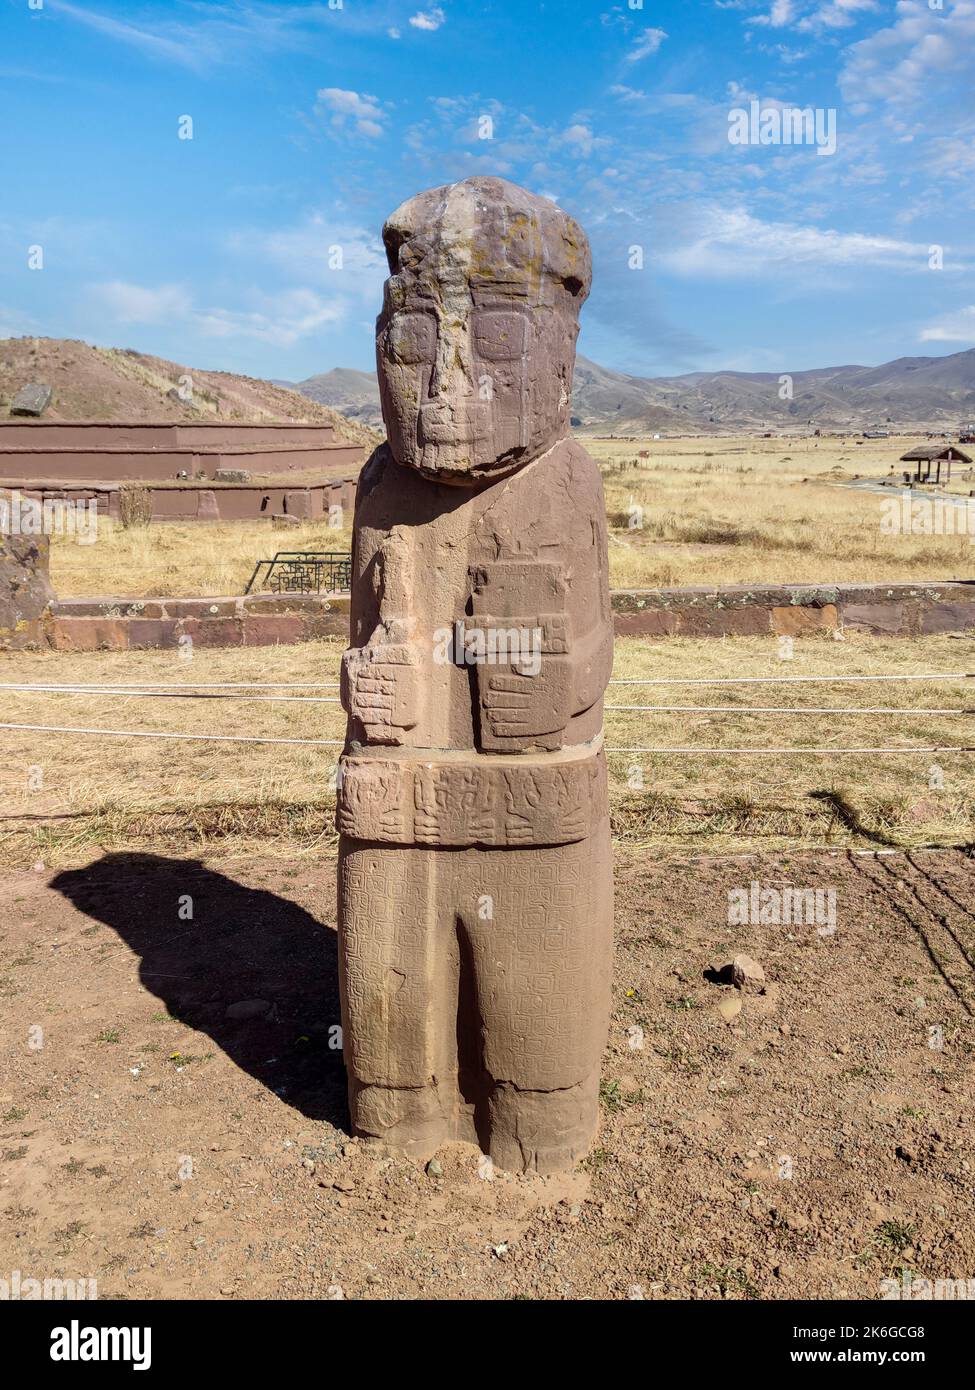 Monolith Fraile, an ancient artifact carved in sandstone grain of 3 m. tall, in Tiwanaku or Tiahuanaco pre-columbian Archaeological site, in Bolivia. Stock Photo